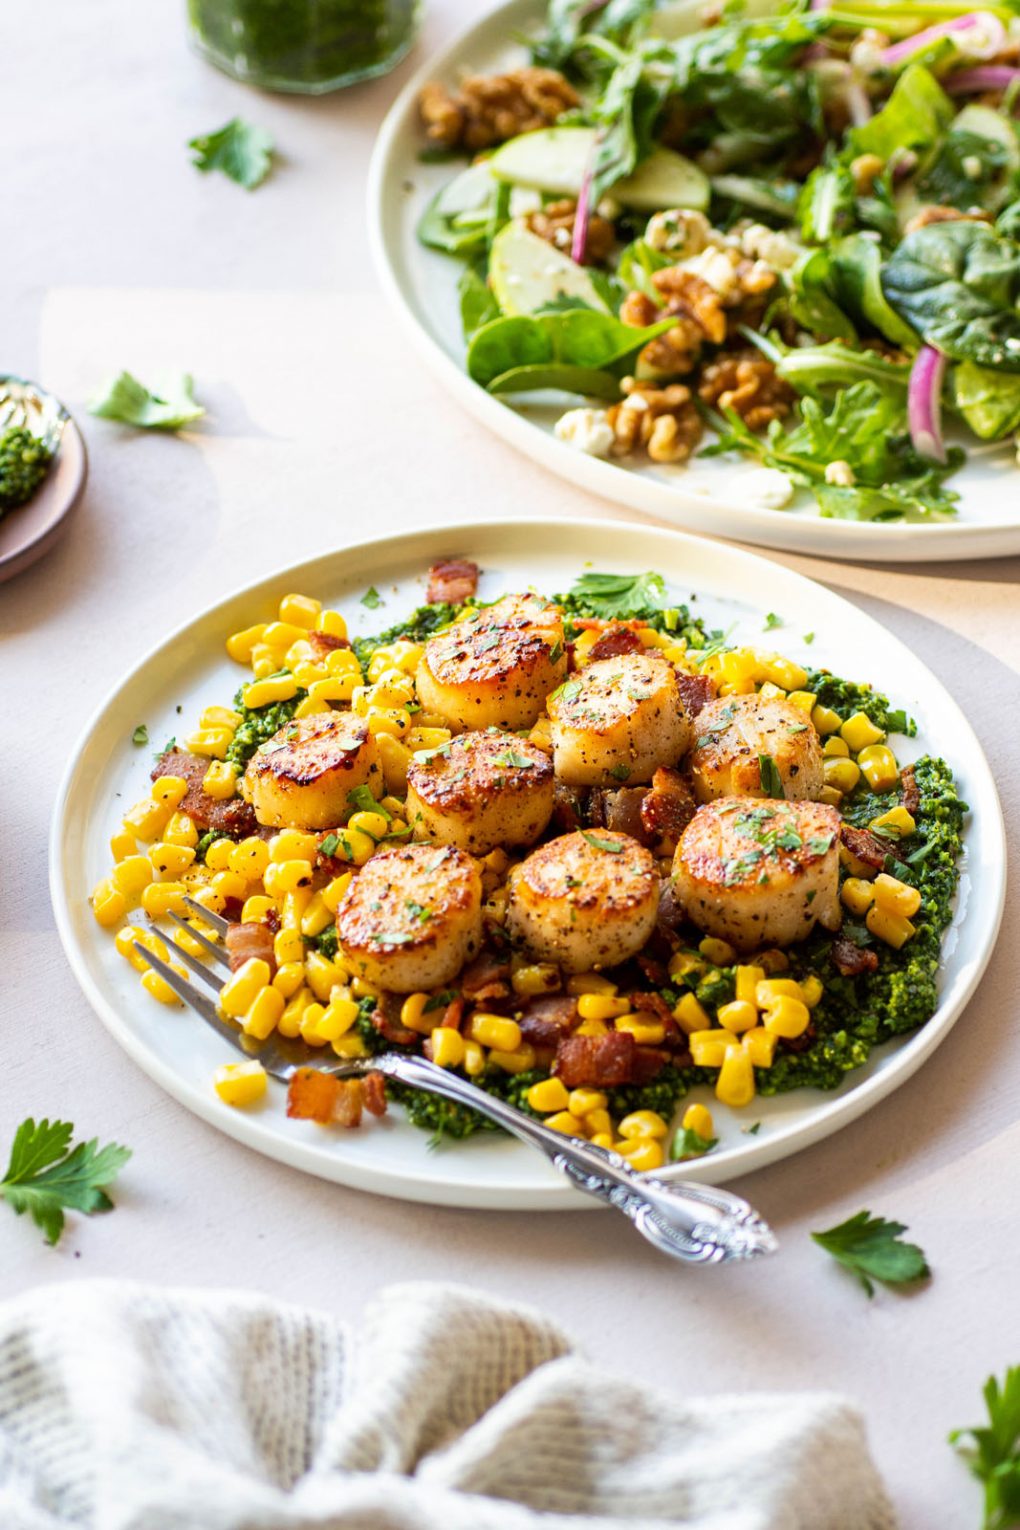 Zoomed out side angle shot of scallops over a corn and bacon saute and kale pesto. On a round white plate placed on a light colored background. In the background is a large plate of salad and some torn parsley leaves.